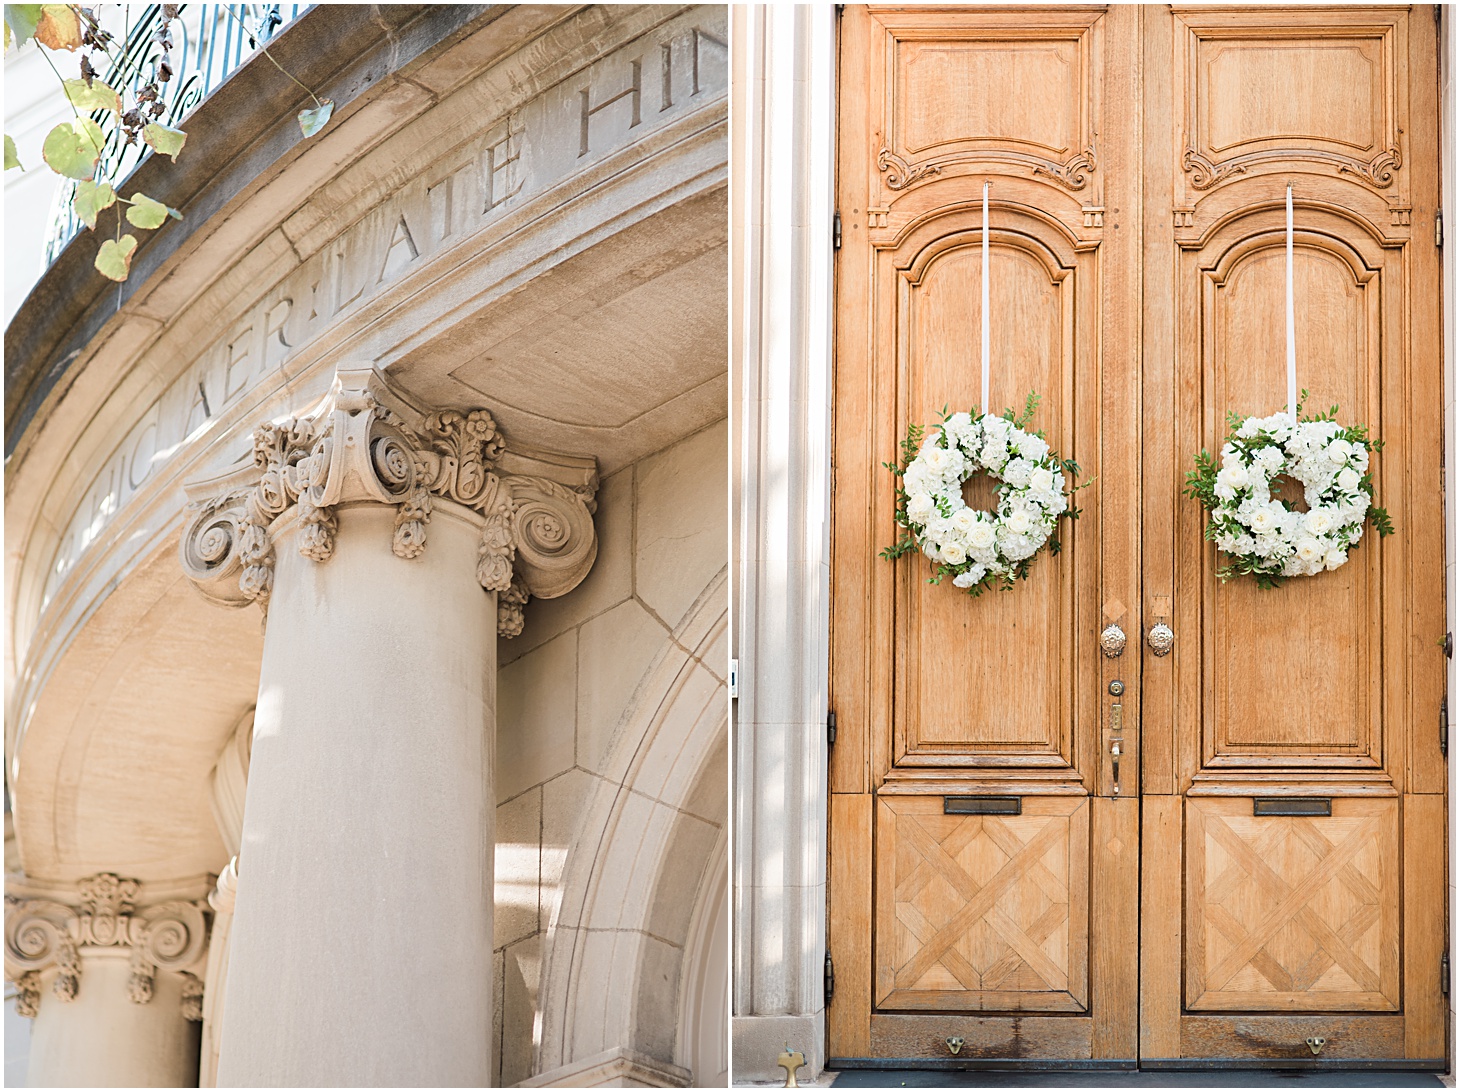 Wreaths by The Enchanted Florist - A Thoroughly Washingtonian Wedding at Meridian House in DC by Sarah Bradshaw 